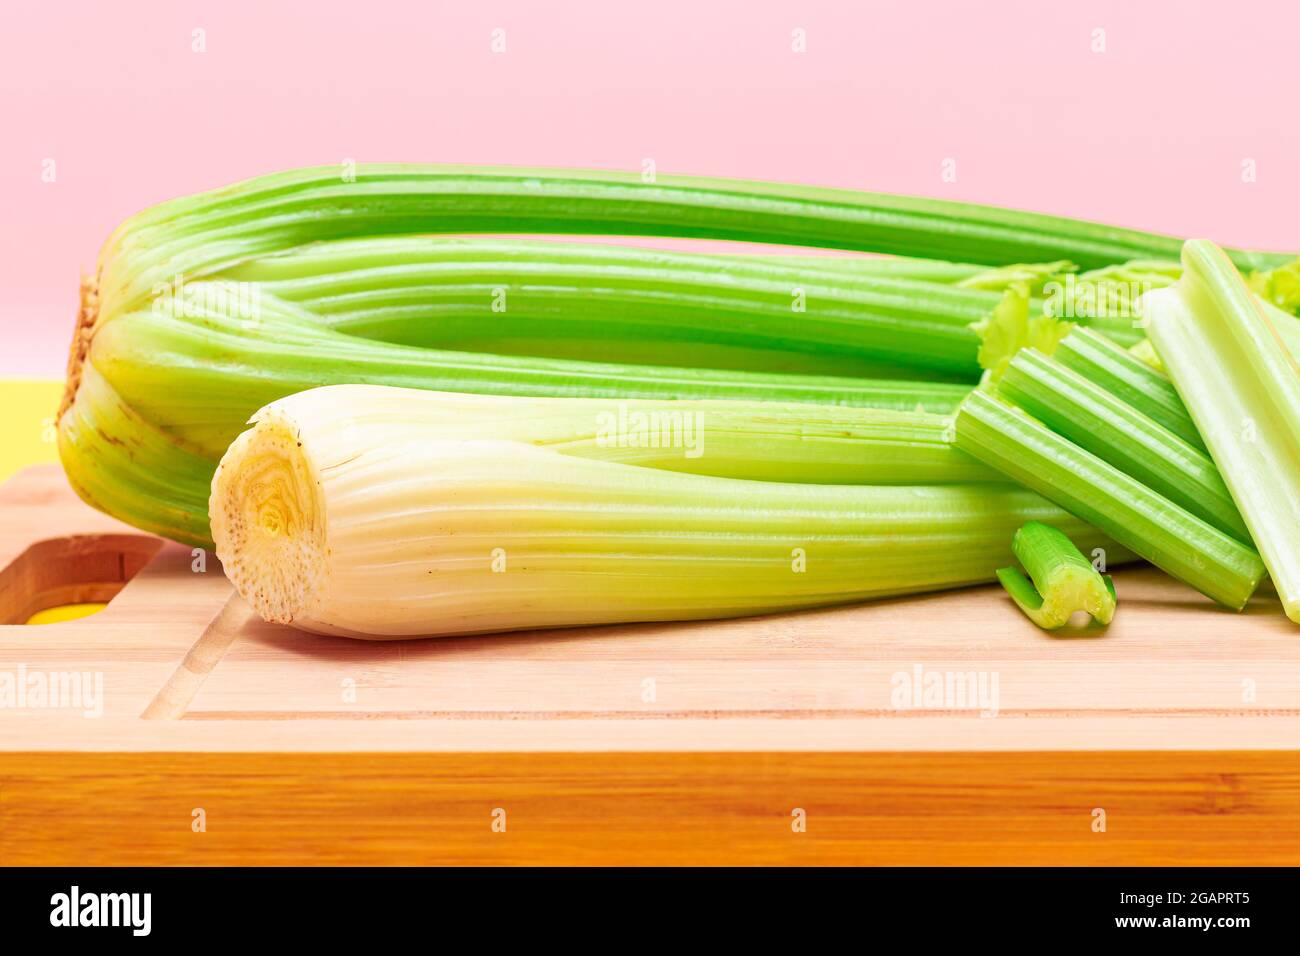 Fresh Celery Stem and Chopped Celery Sticks on Wooden Cutting Board. Vegan and Vegetarian Culture. Raw Food. Healthy Diet with Negative Calorie Content. Slimming Food Stock Photo